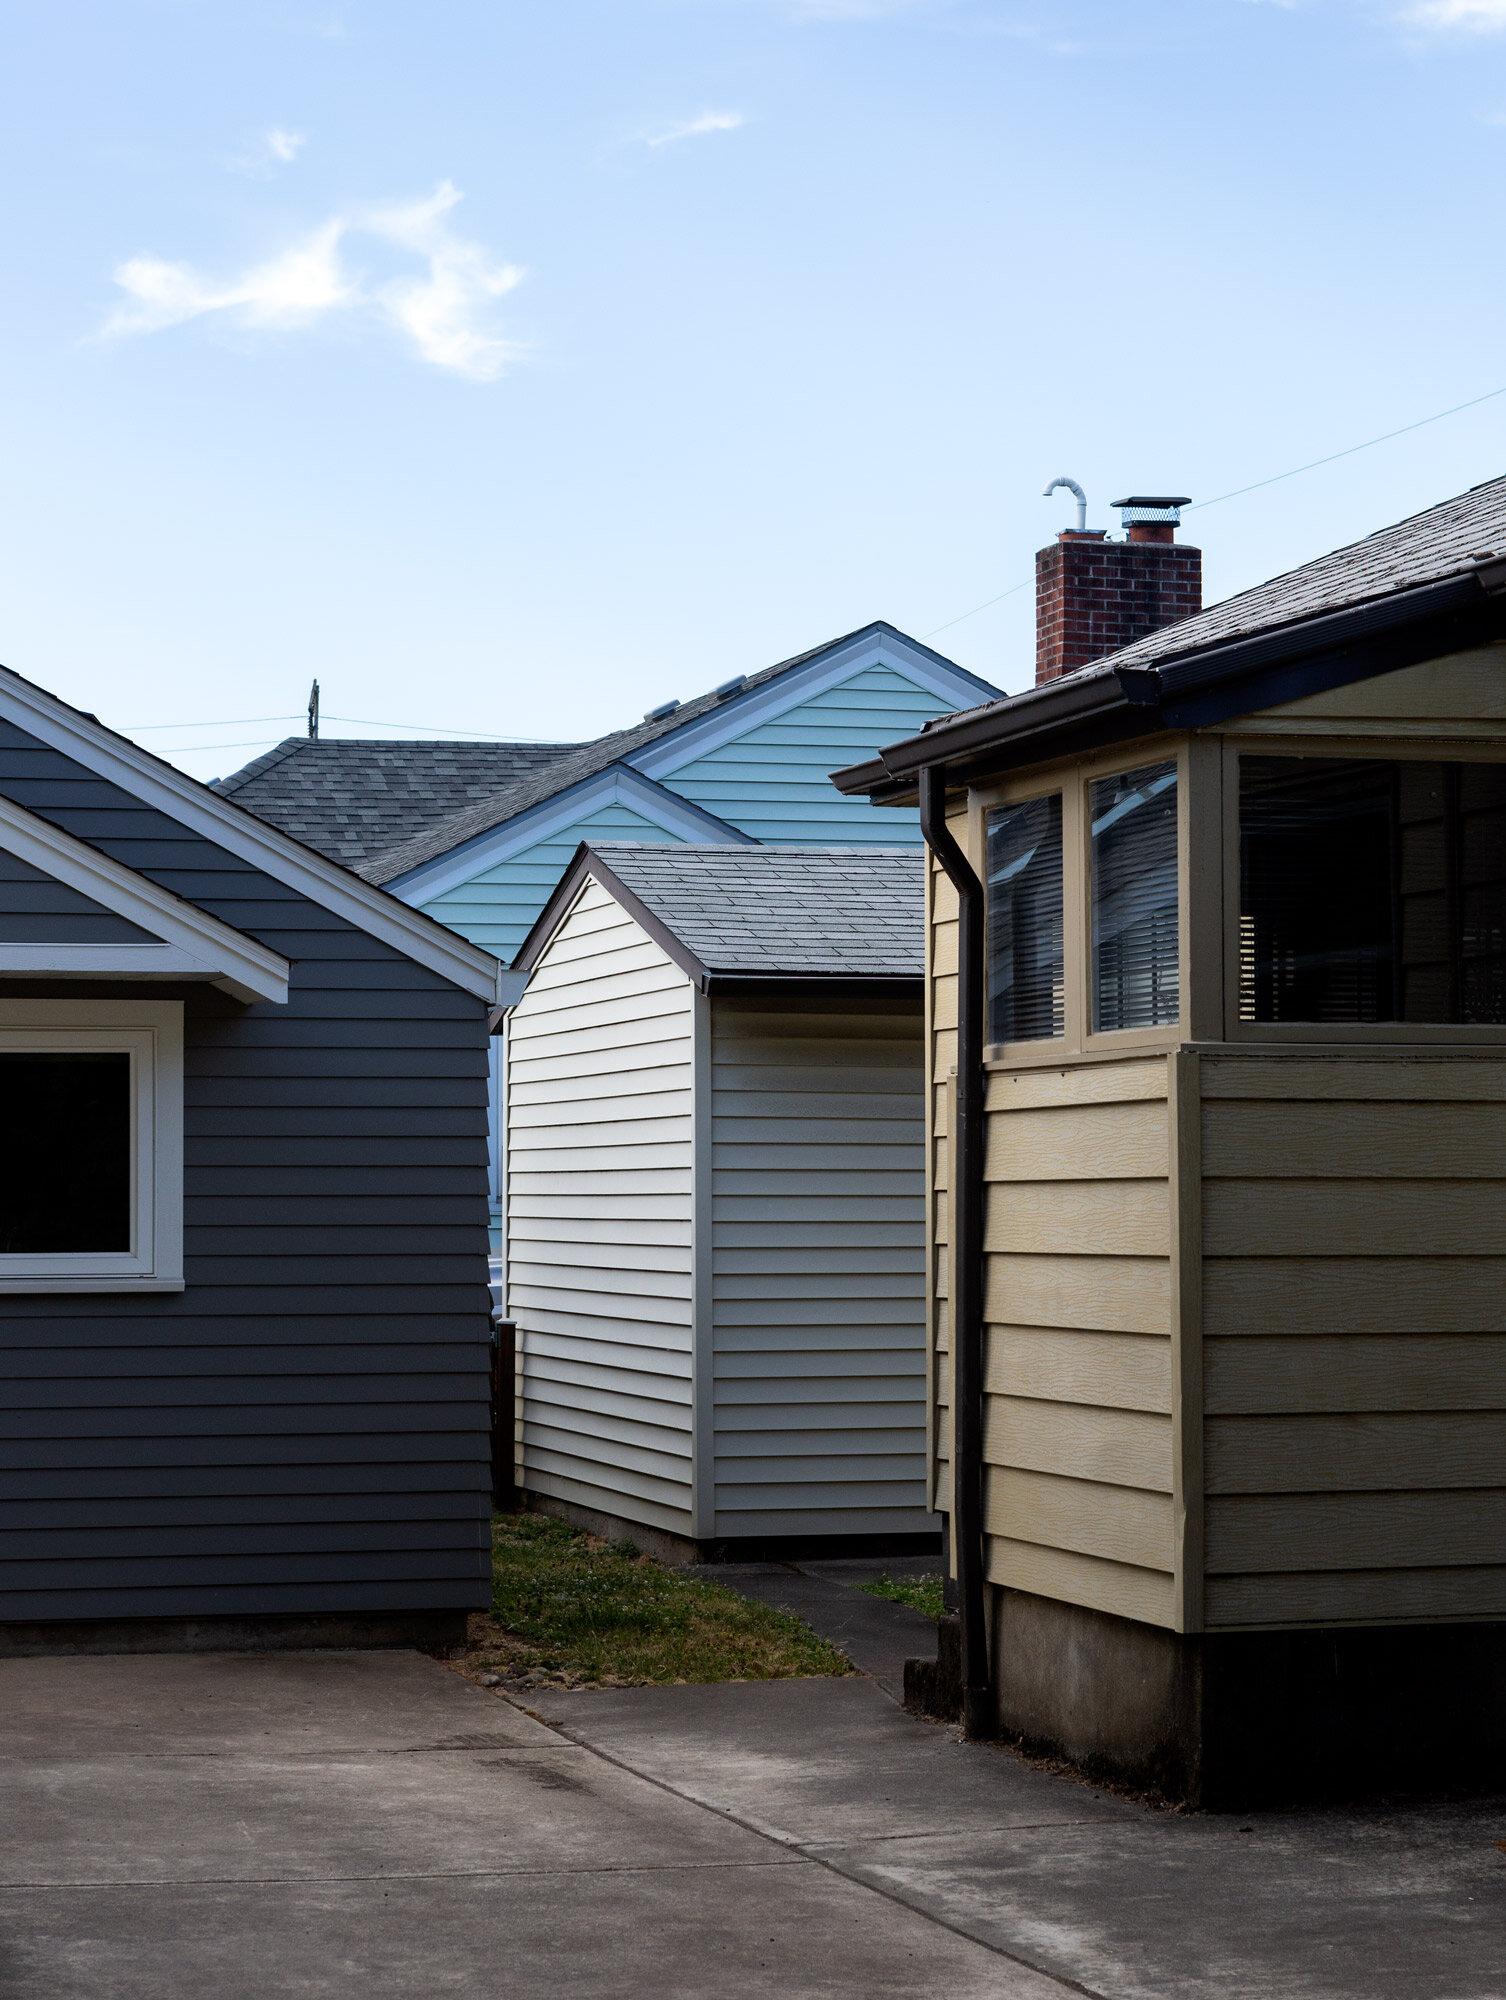 grouping-of-small-houses-in-portland-web-.jpg